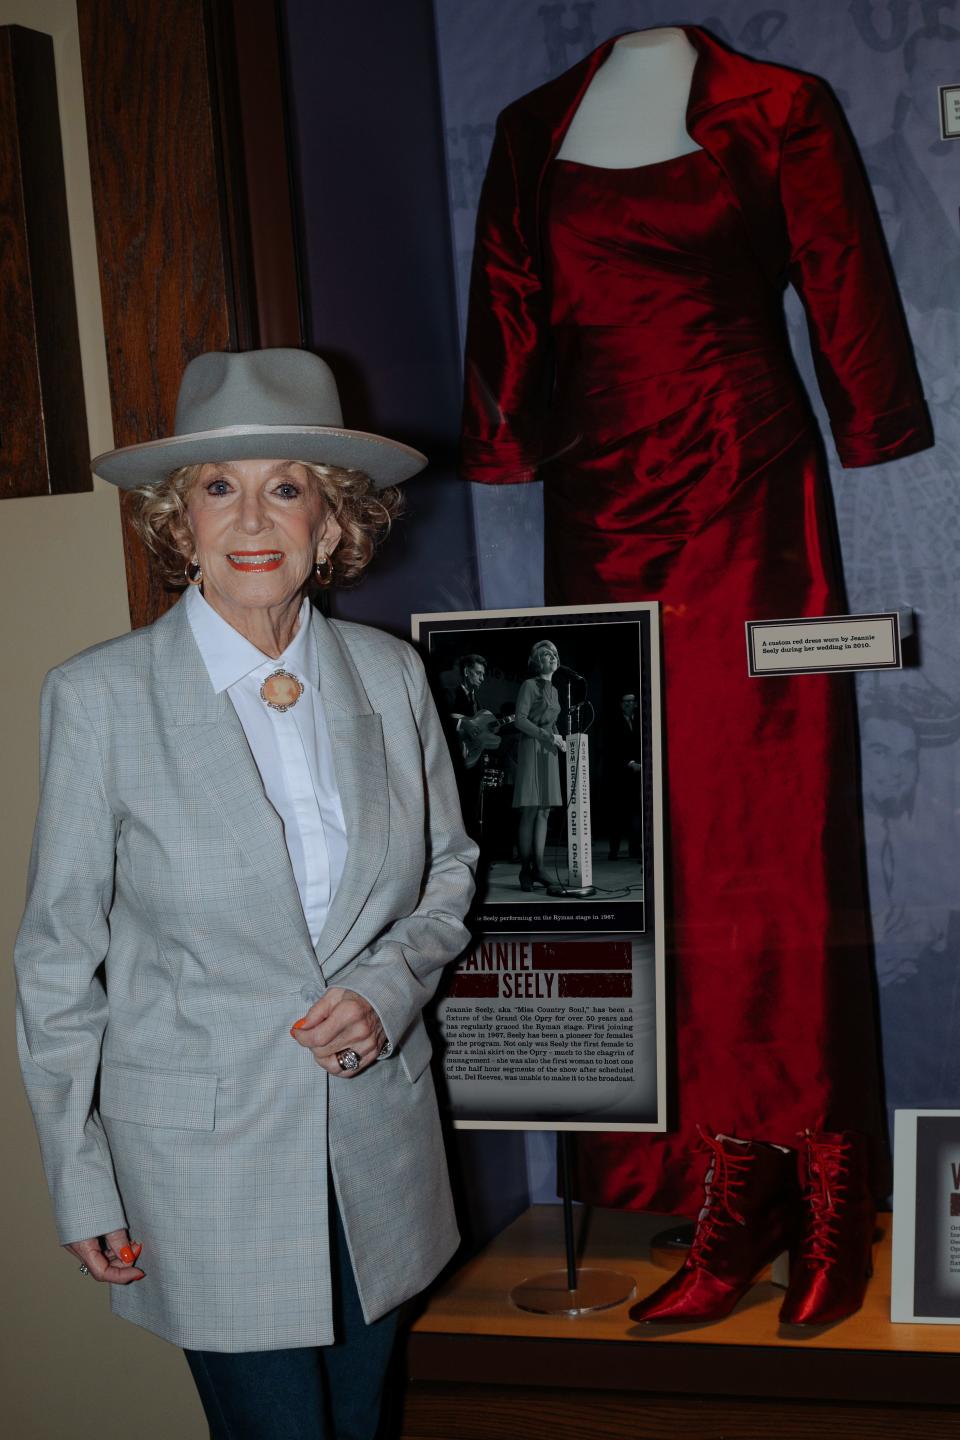 Grammy-winner Jeannie Seely stands next to her addition to a Ryman Auditorium exhibition honoring the Grand Ole Opry's "golden era."